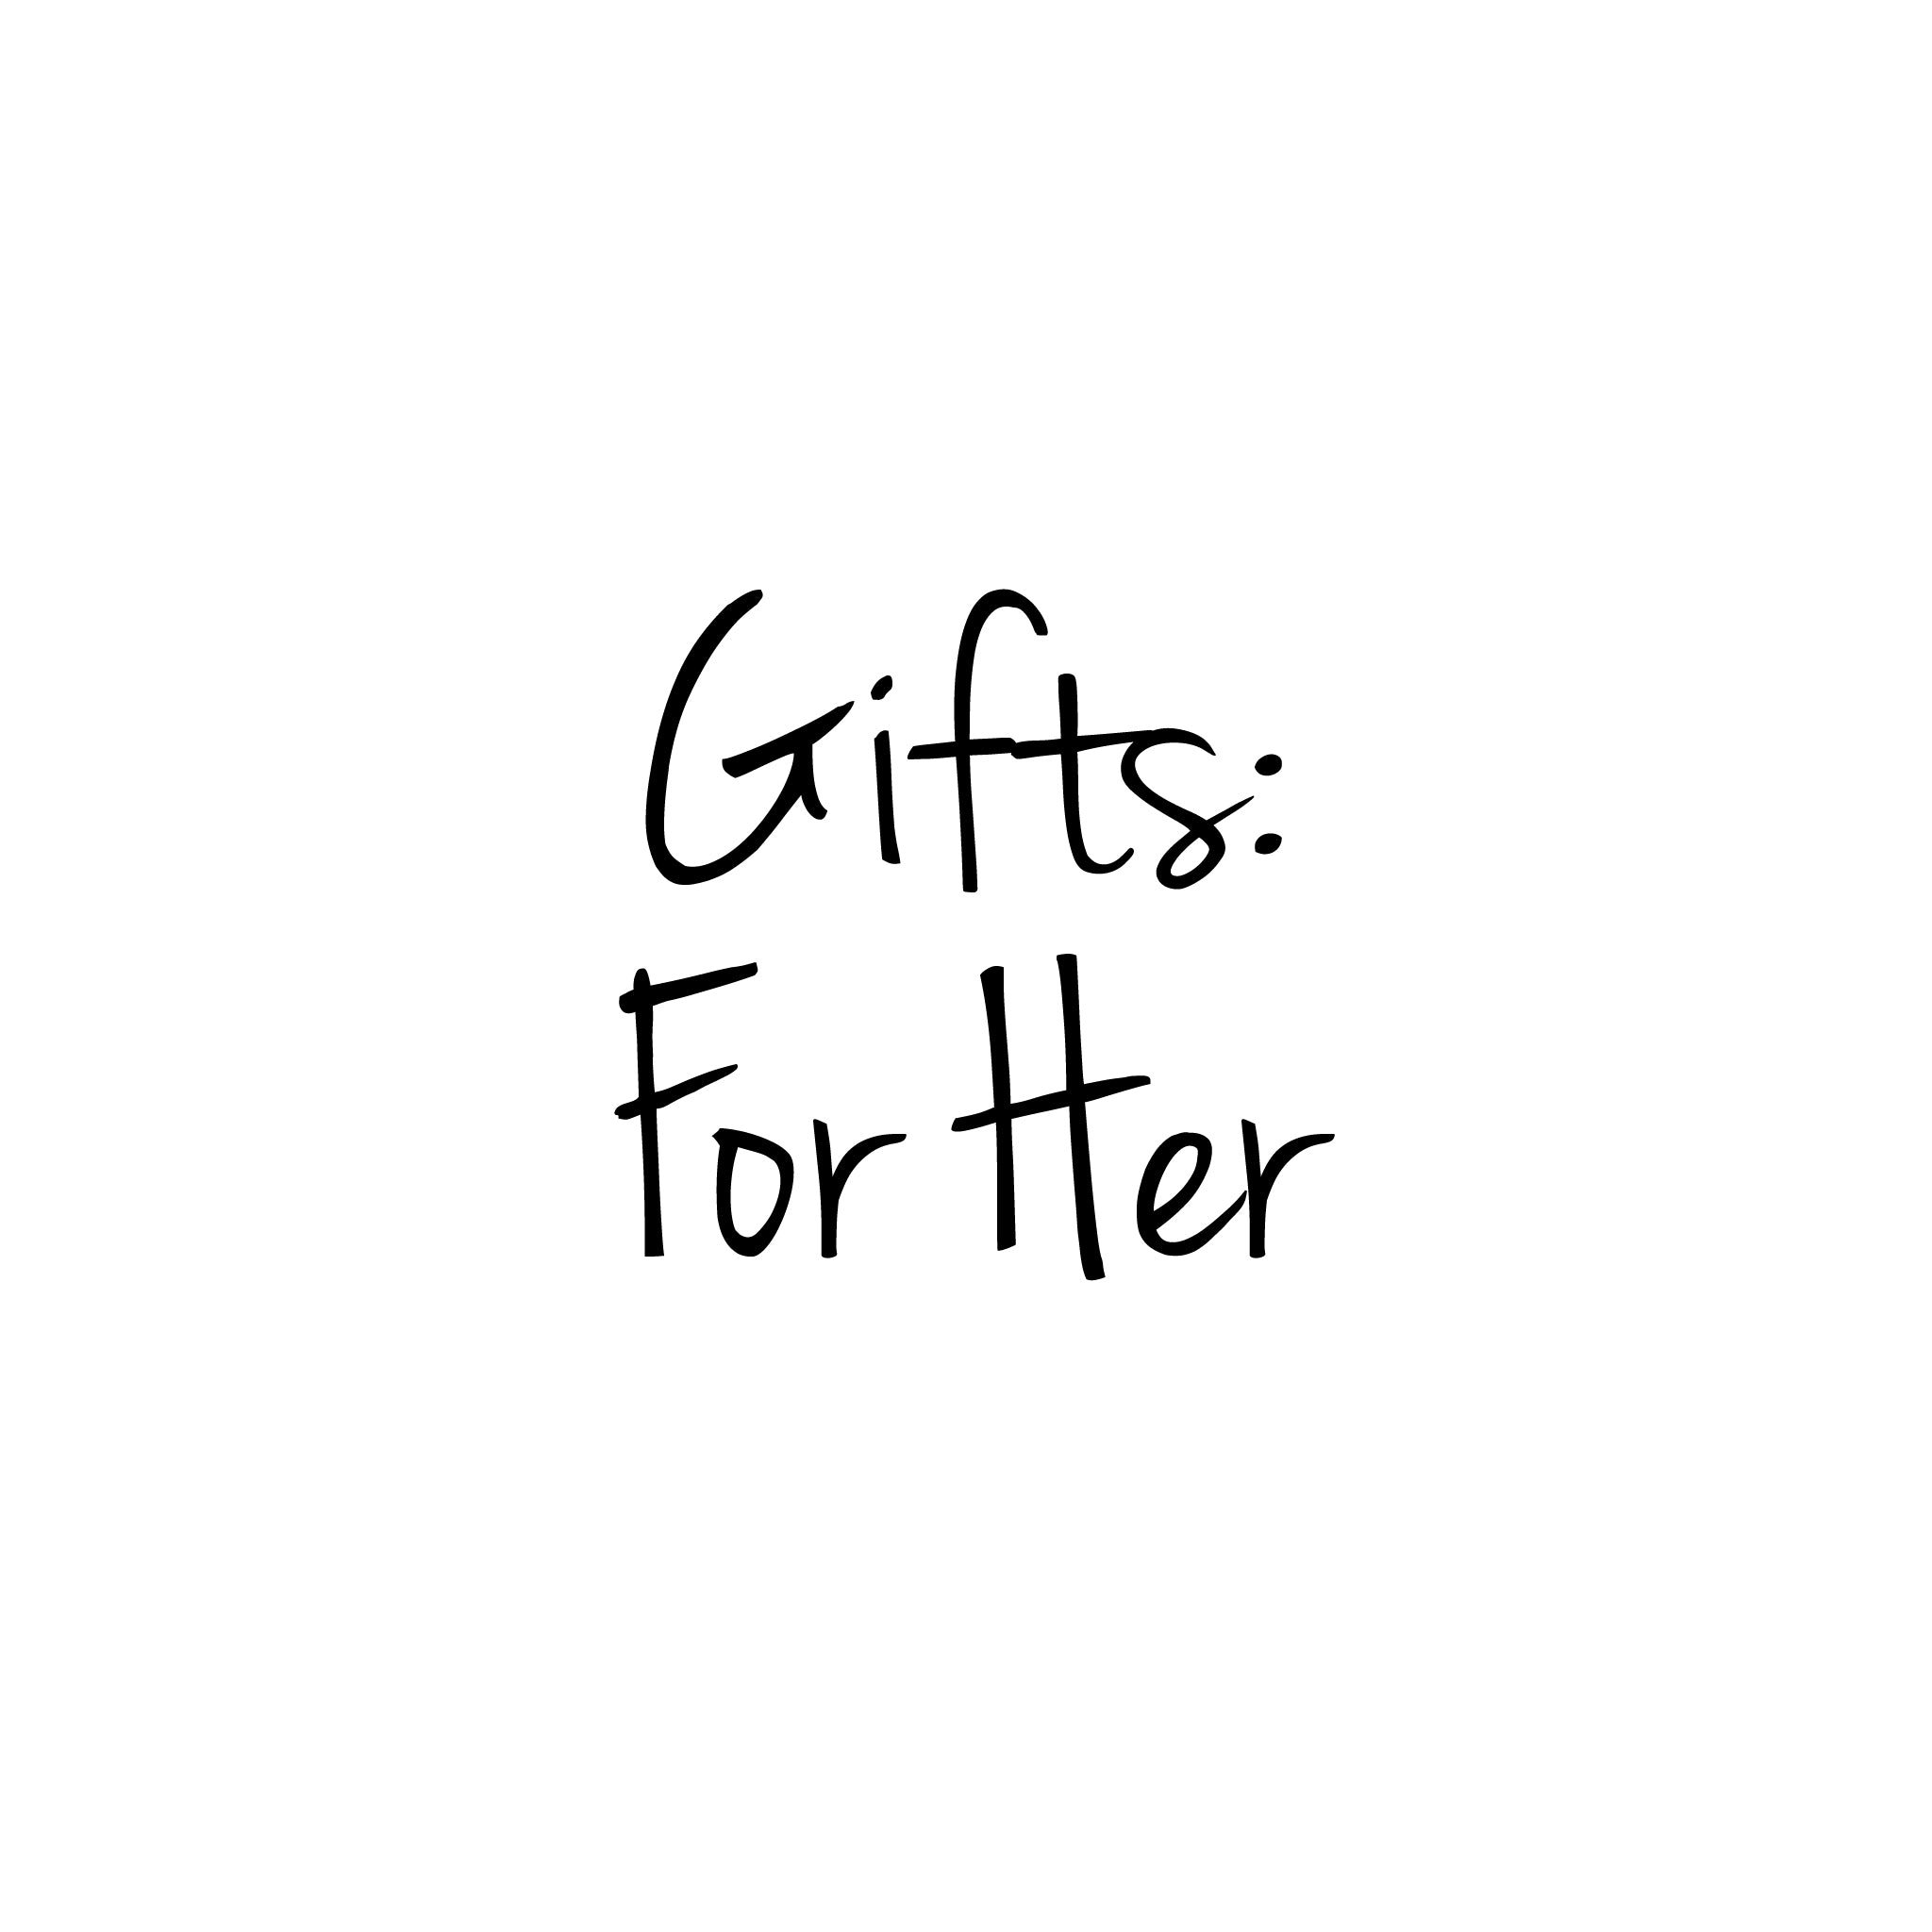 GIFTS FOR HER